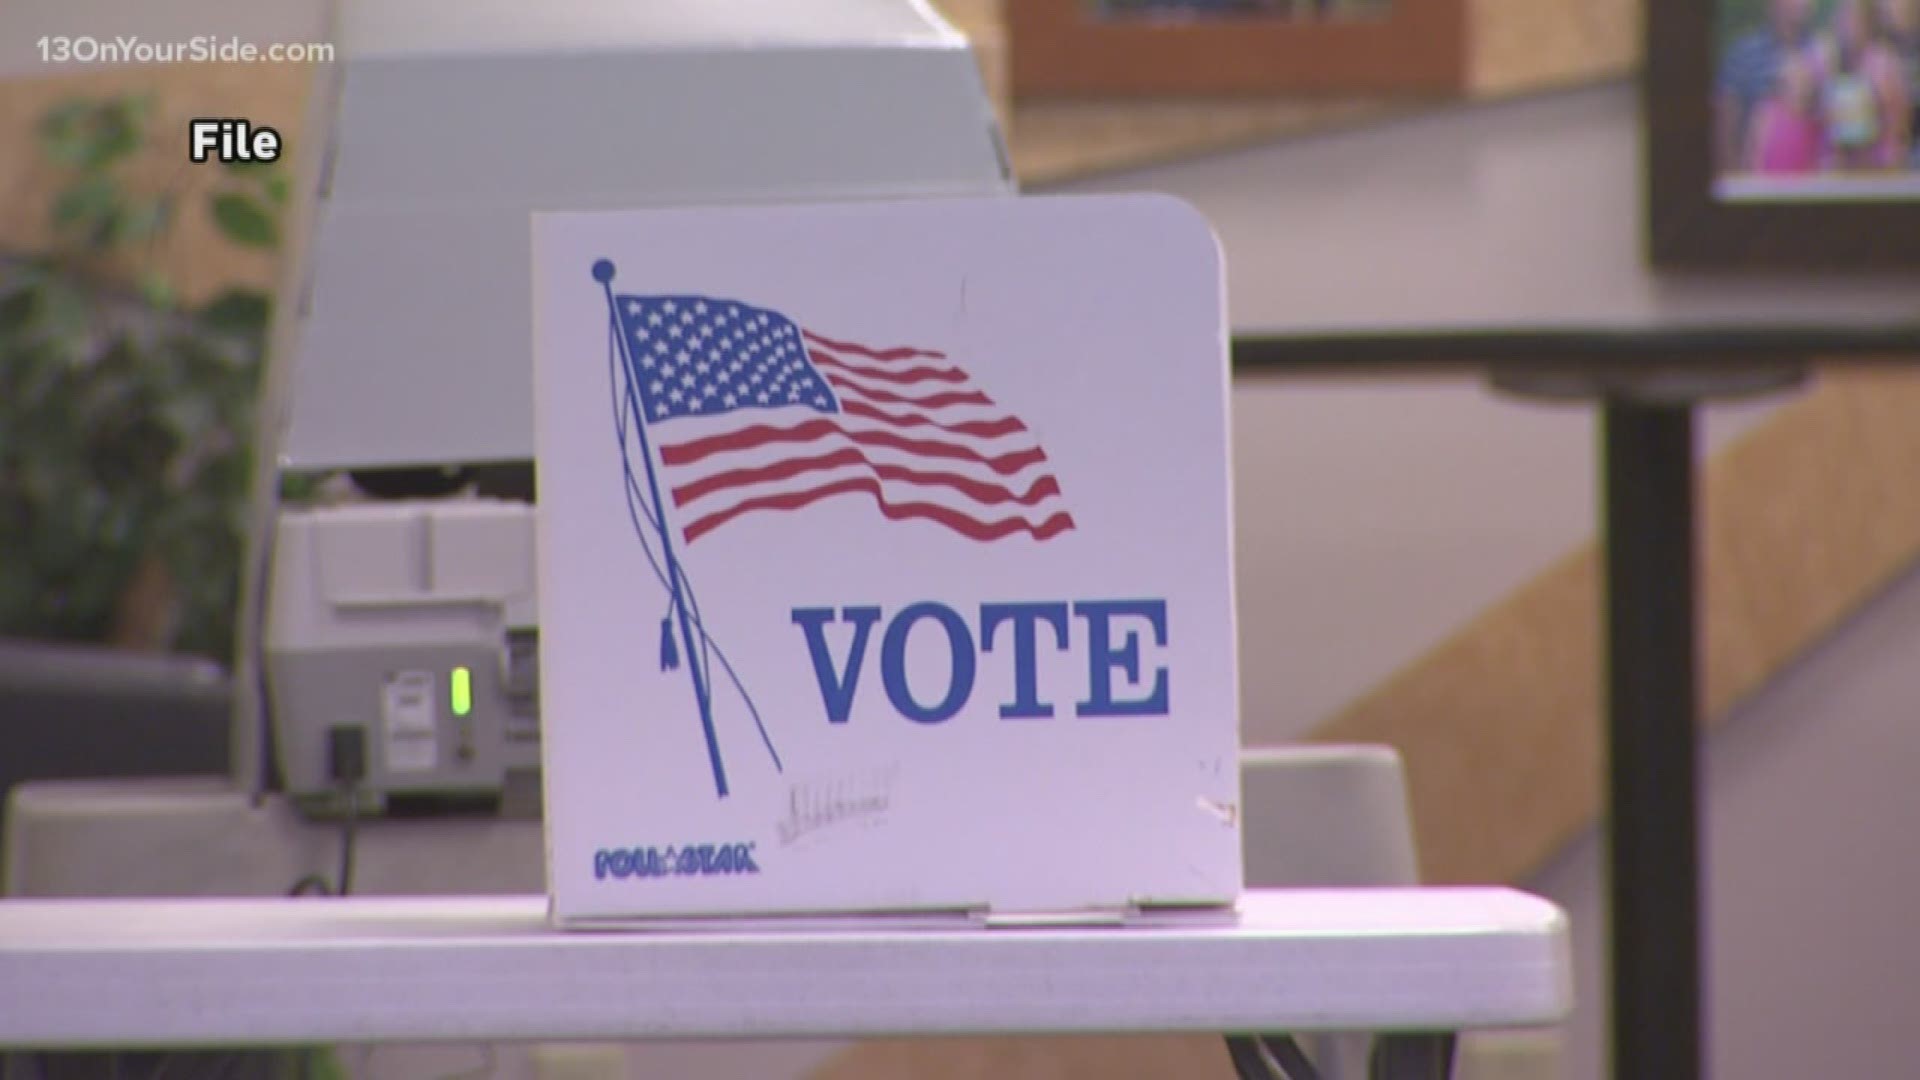 Voting is underway in Michigan's presidential primary more than a year after the option was greatly expanded through the passage of a ballot measure.